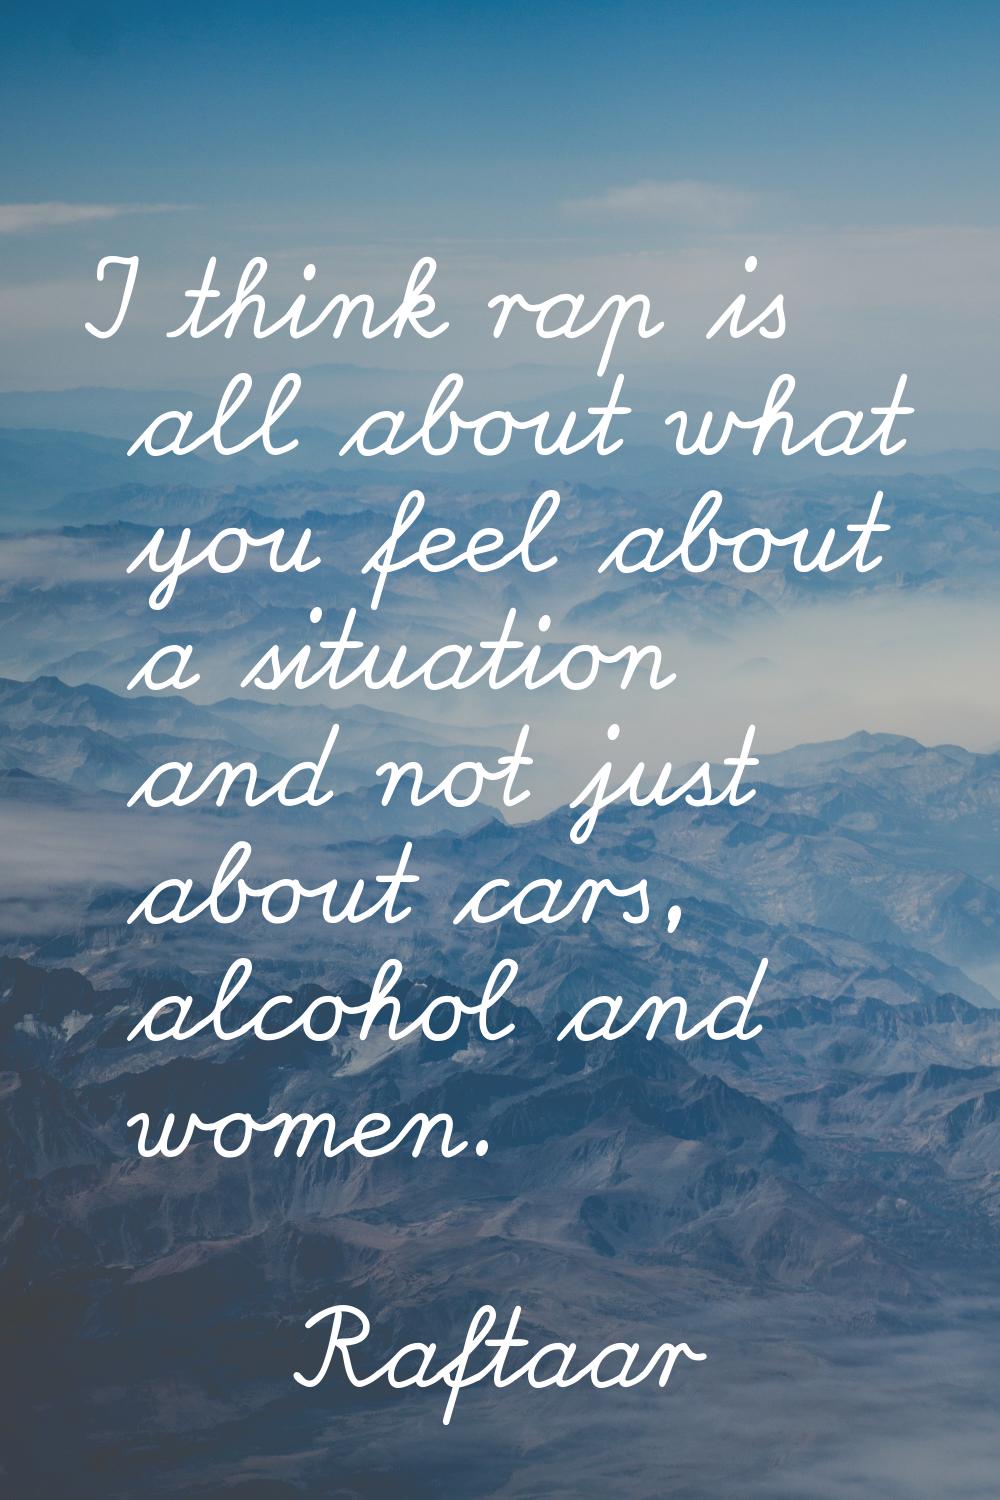 I think rap is all about what you feel about a situation and not just about cars, alcohol and women